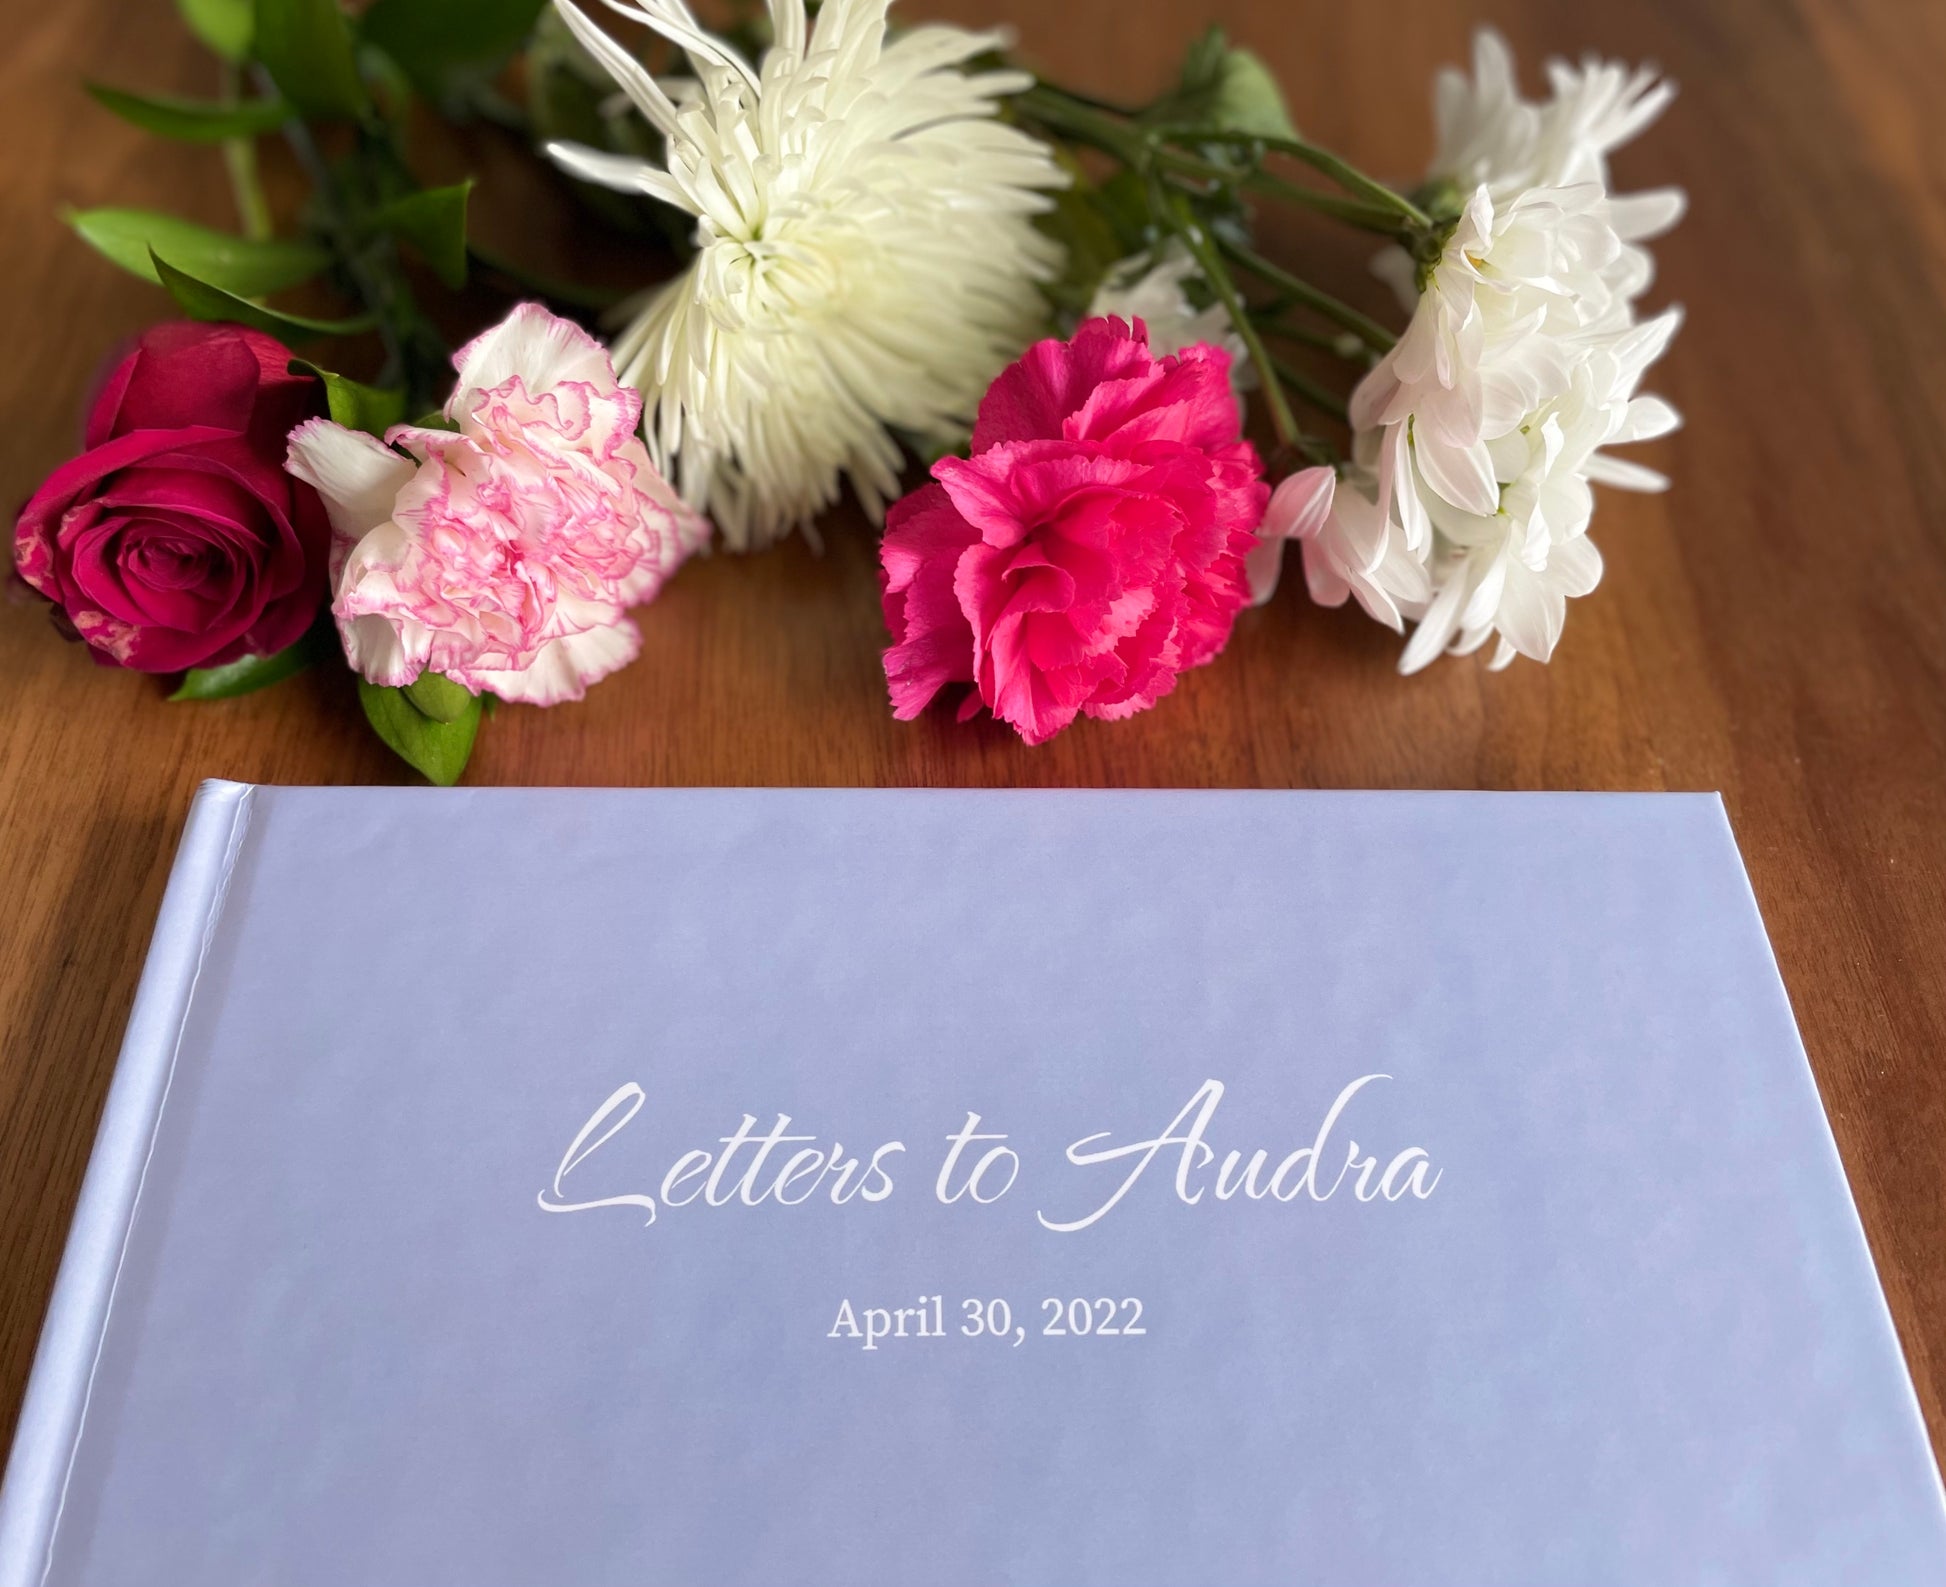 Our version of 'letters to the bride' 👰‍♀️💍 #weddingday